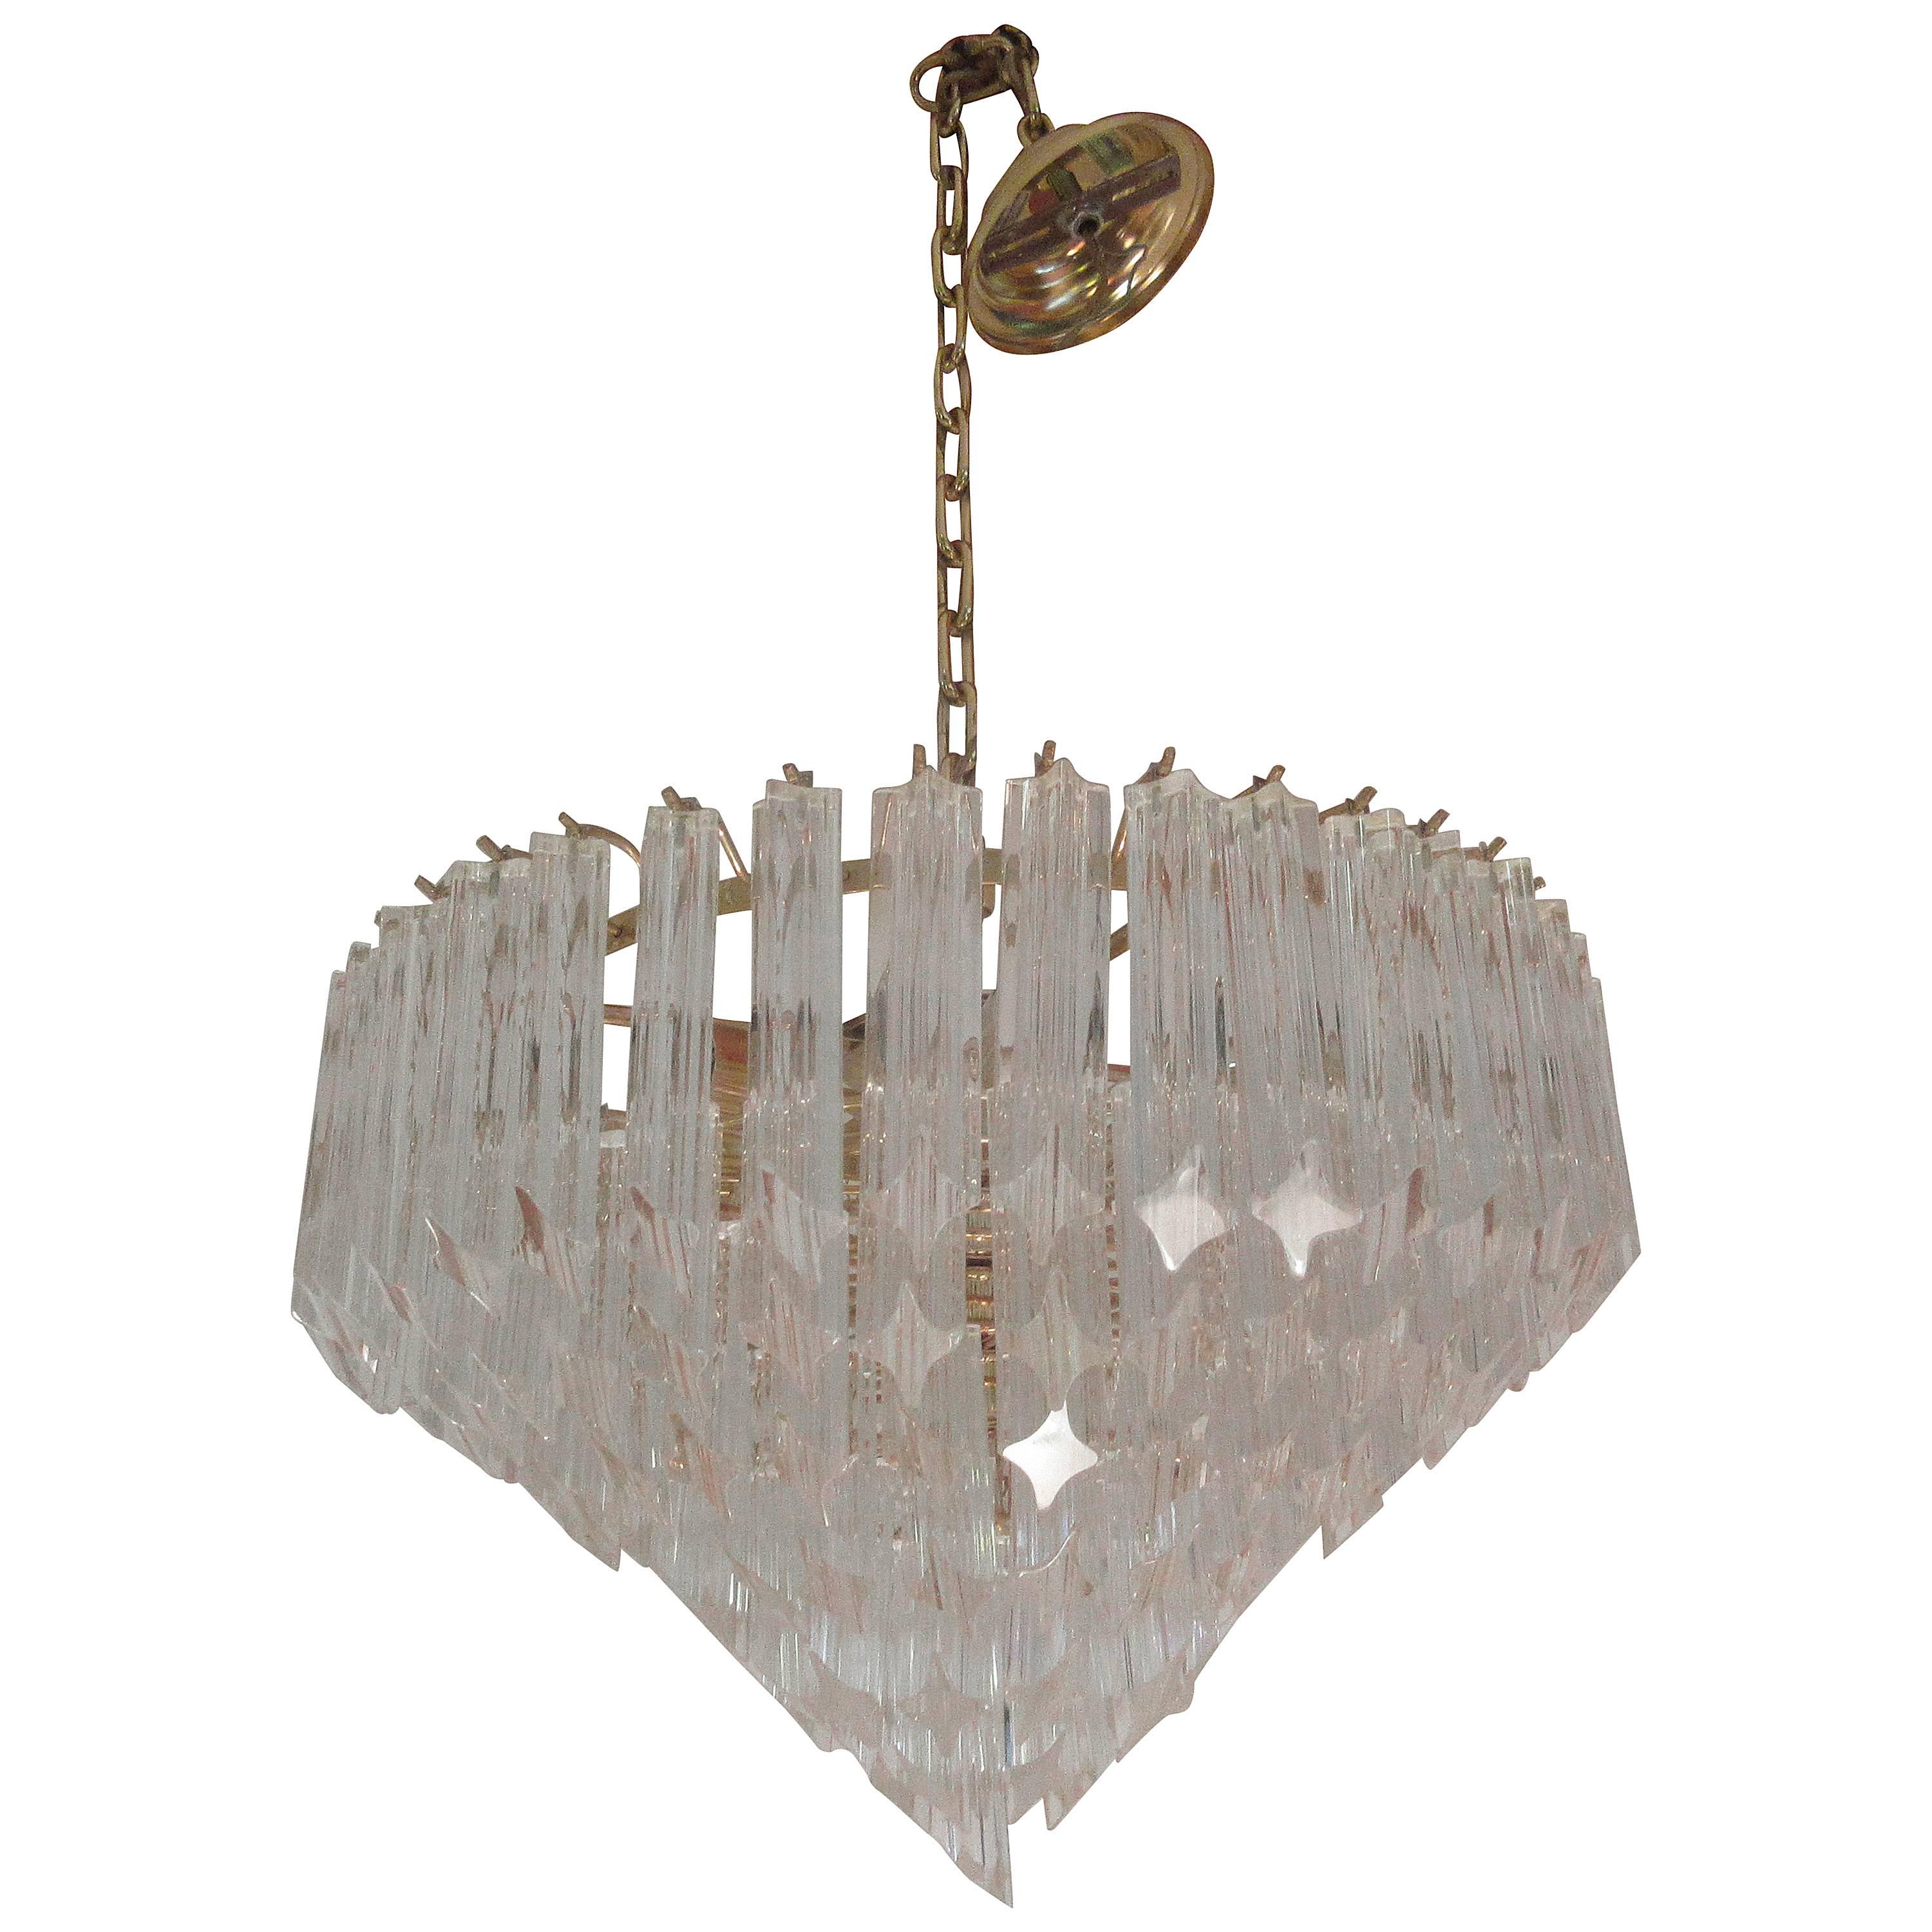 Large Seven-Tiered Venini Chandelier For Sale